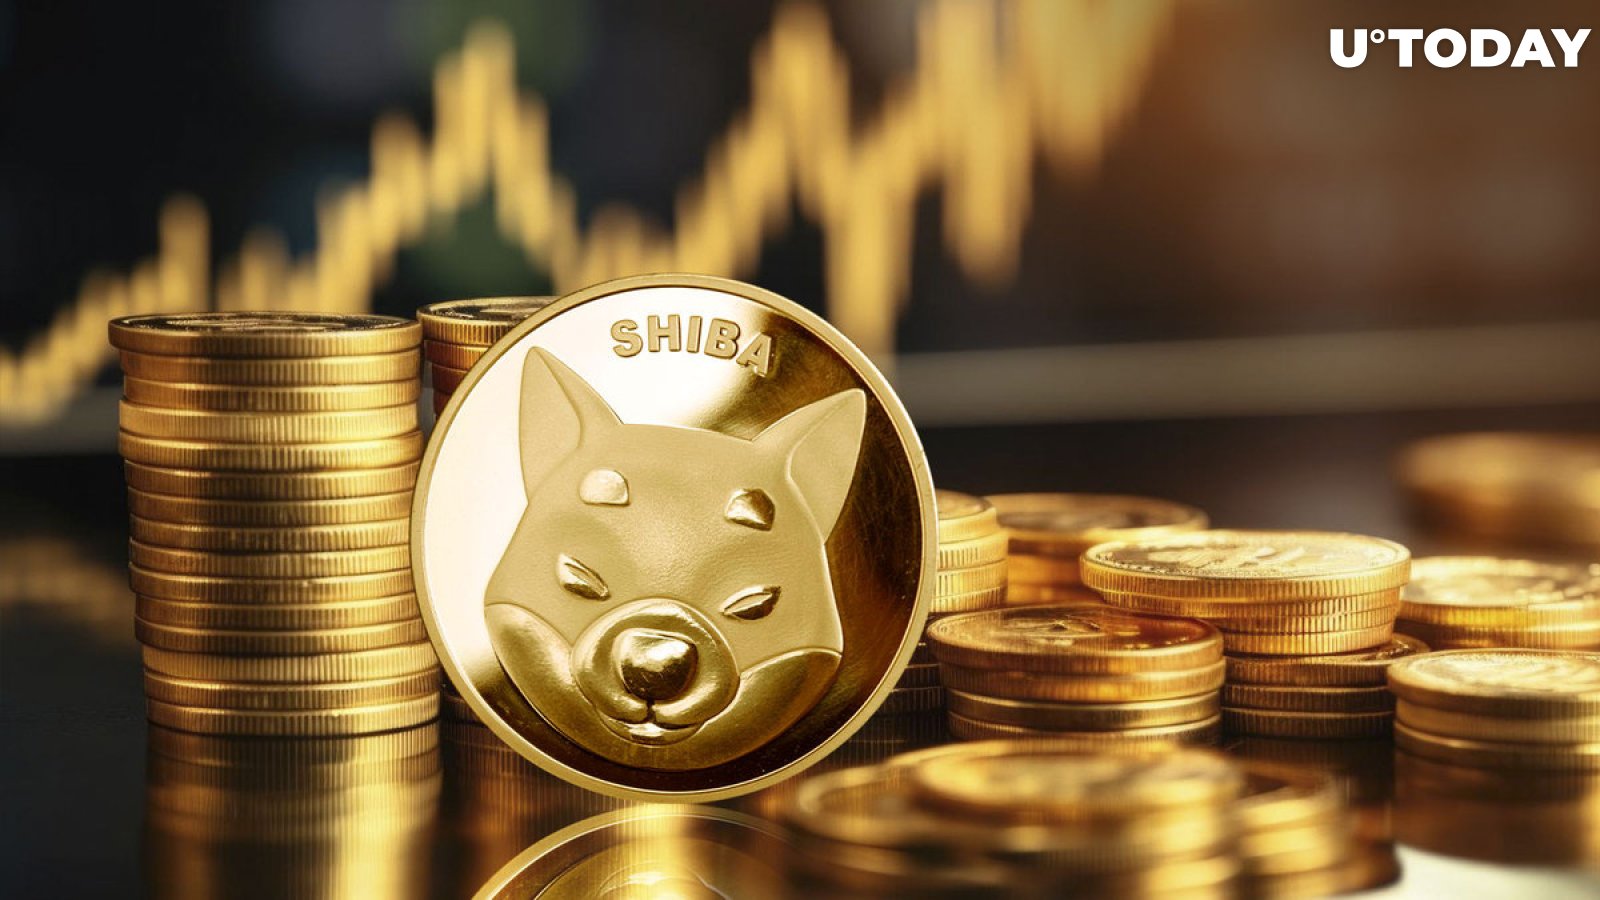 1.356 trillion SHIB suddenly bought by 9 wallets: what is happening?